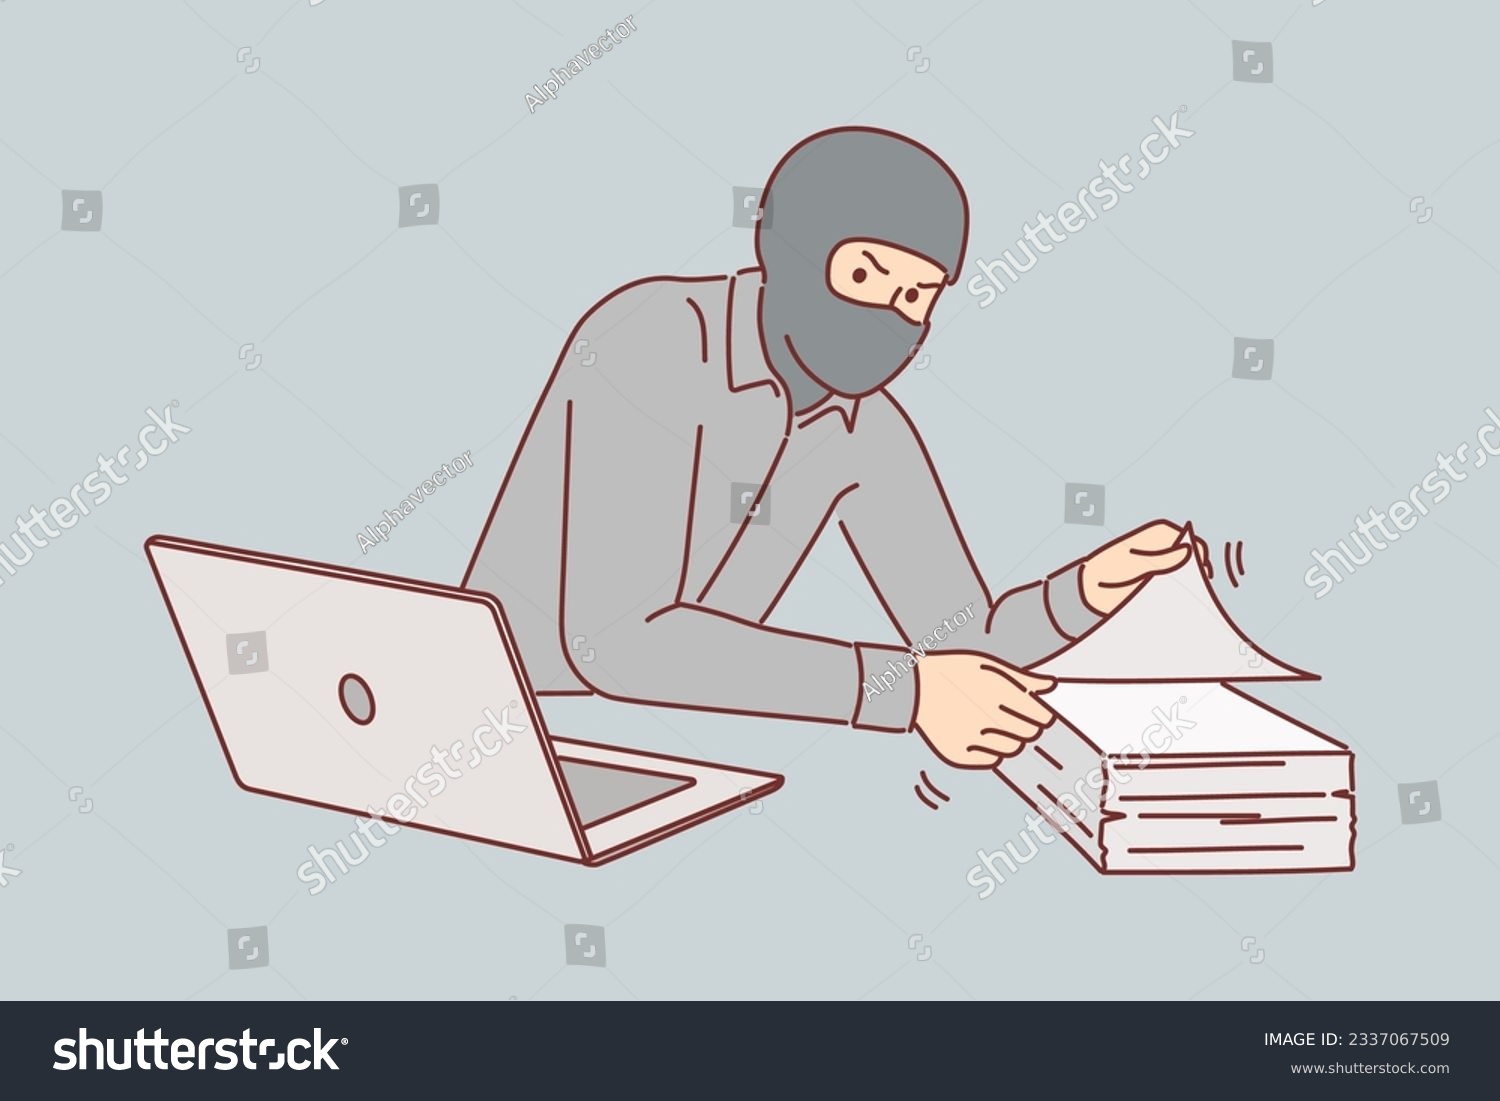 SVG of Man gangster steals documents from office building, wearing mask to hide face and remain anonymous. Concept of commercial espionage and trying to get insider documents about upcoming deals svg